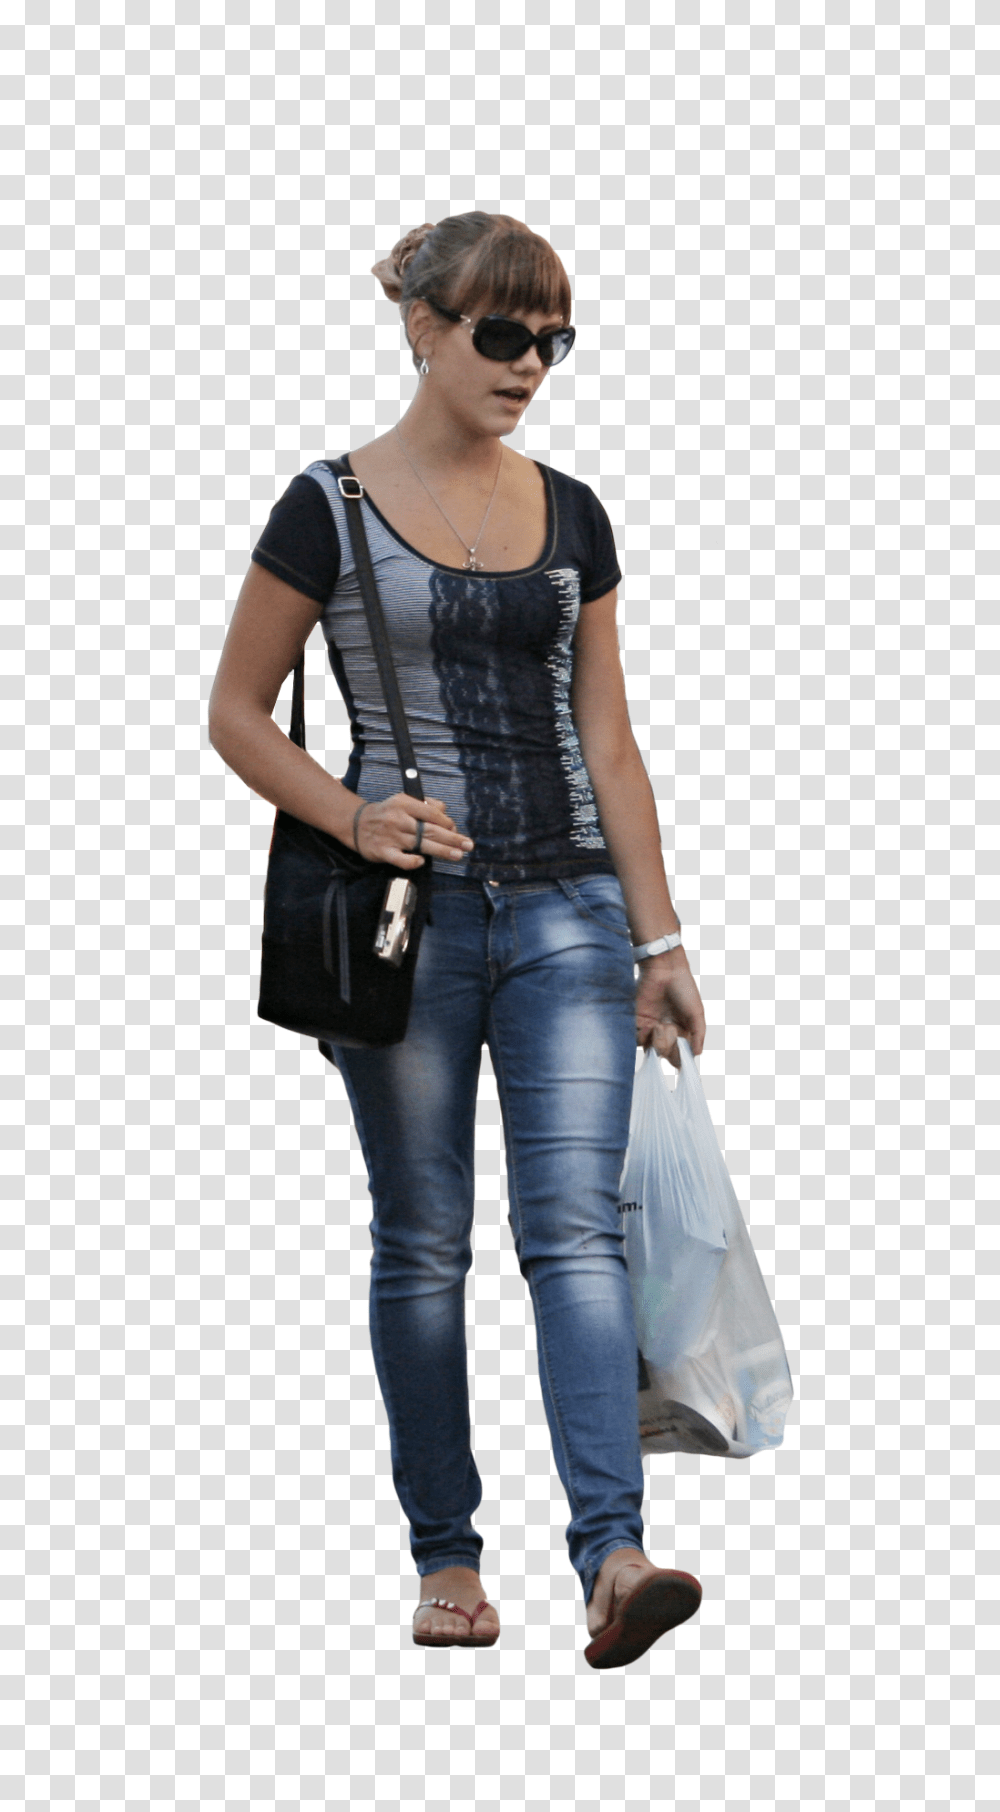 Cut Out People People Cut Out Shopping Full Size Shopping Cut Out, Clothing, Apparel, Person, Pants Transparent Png